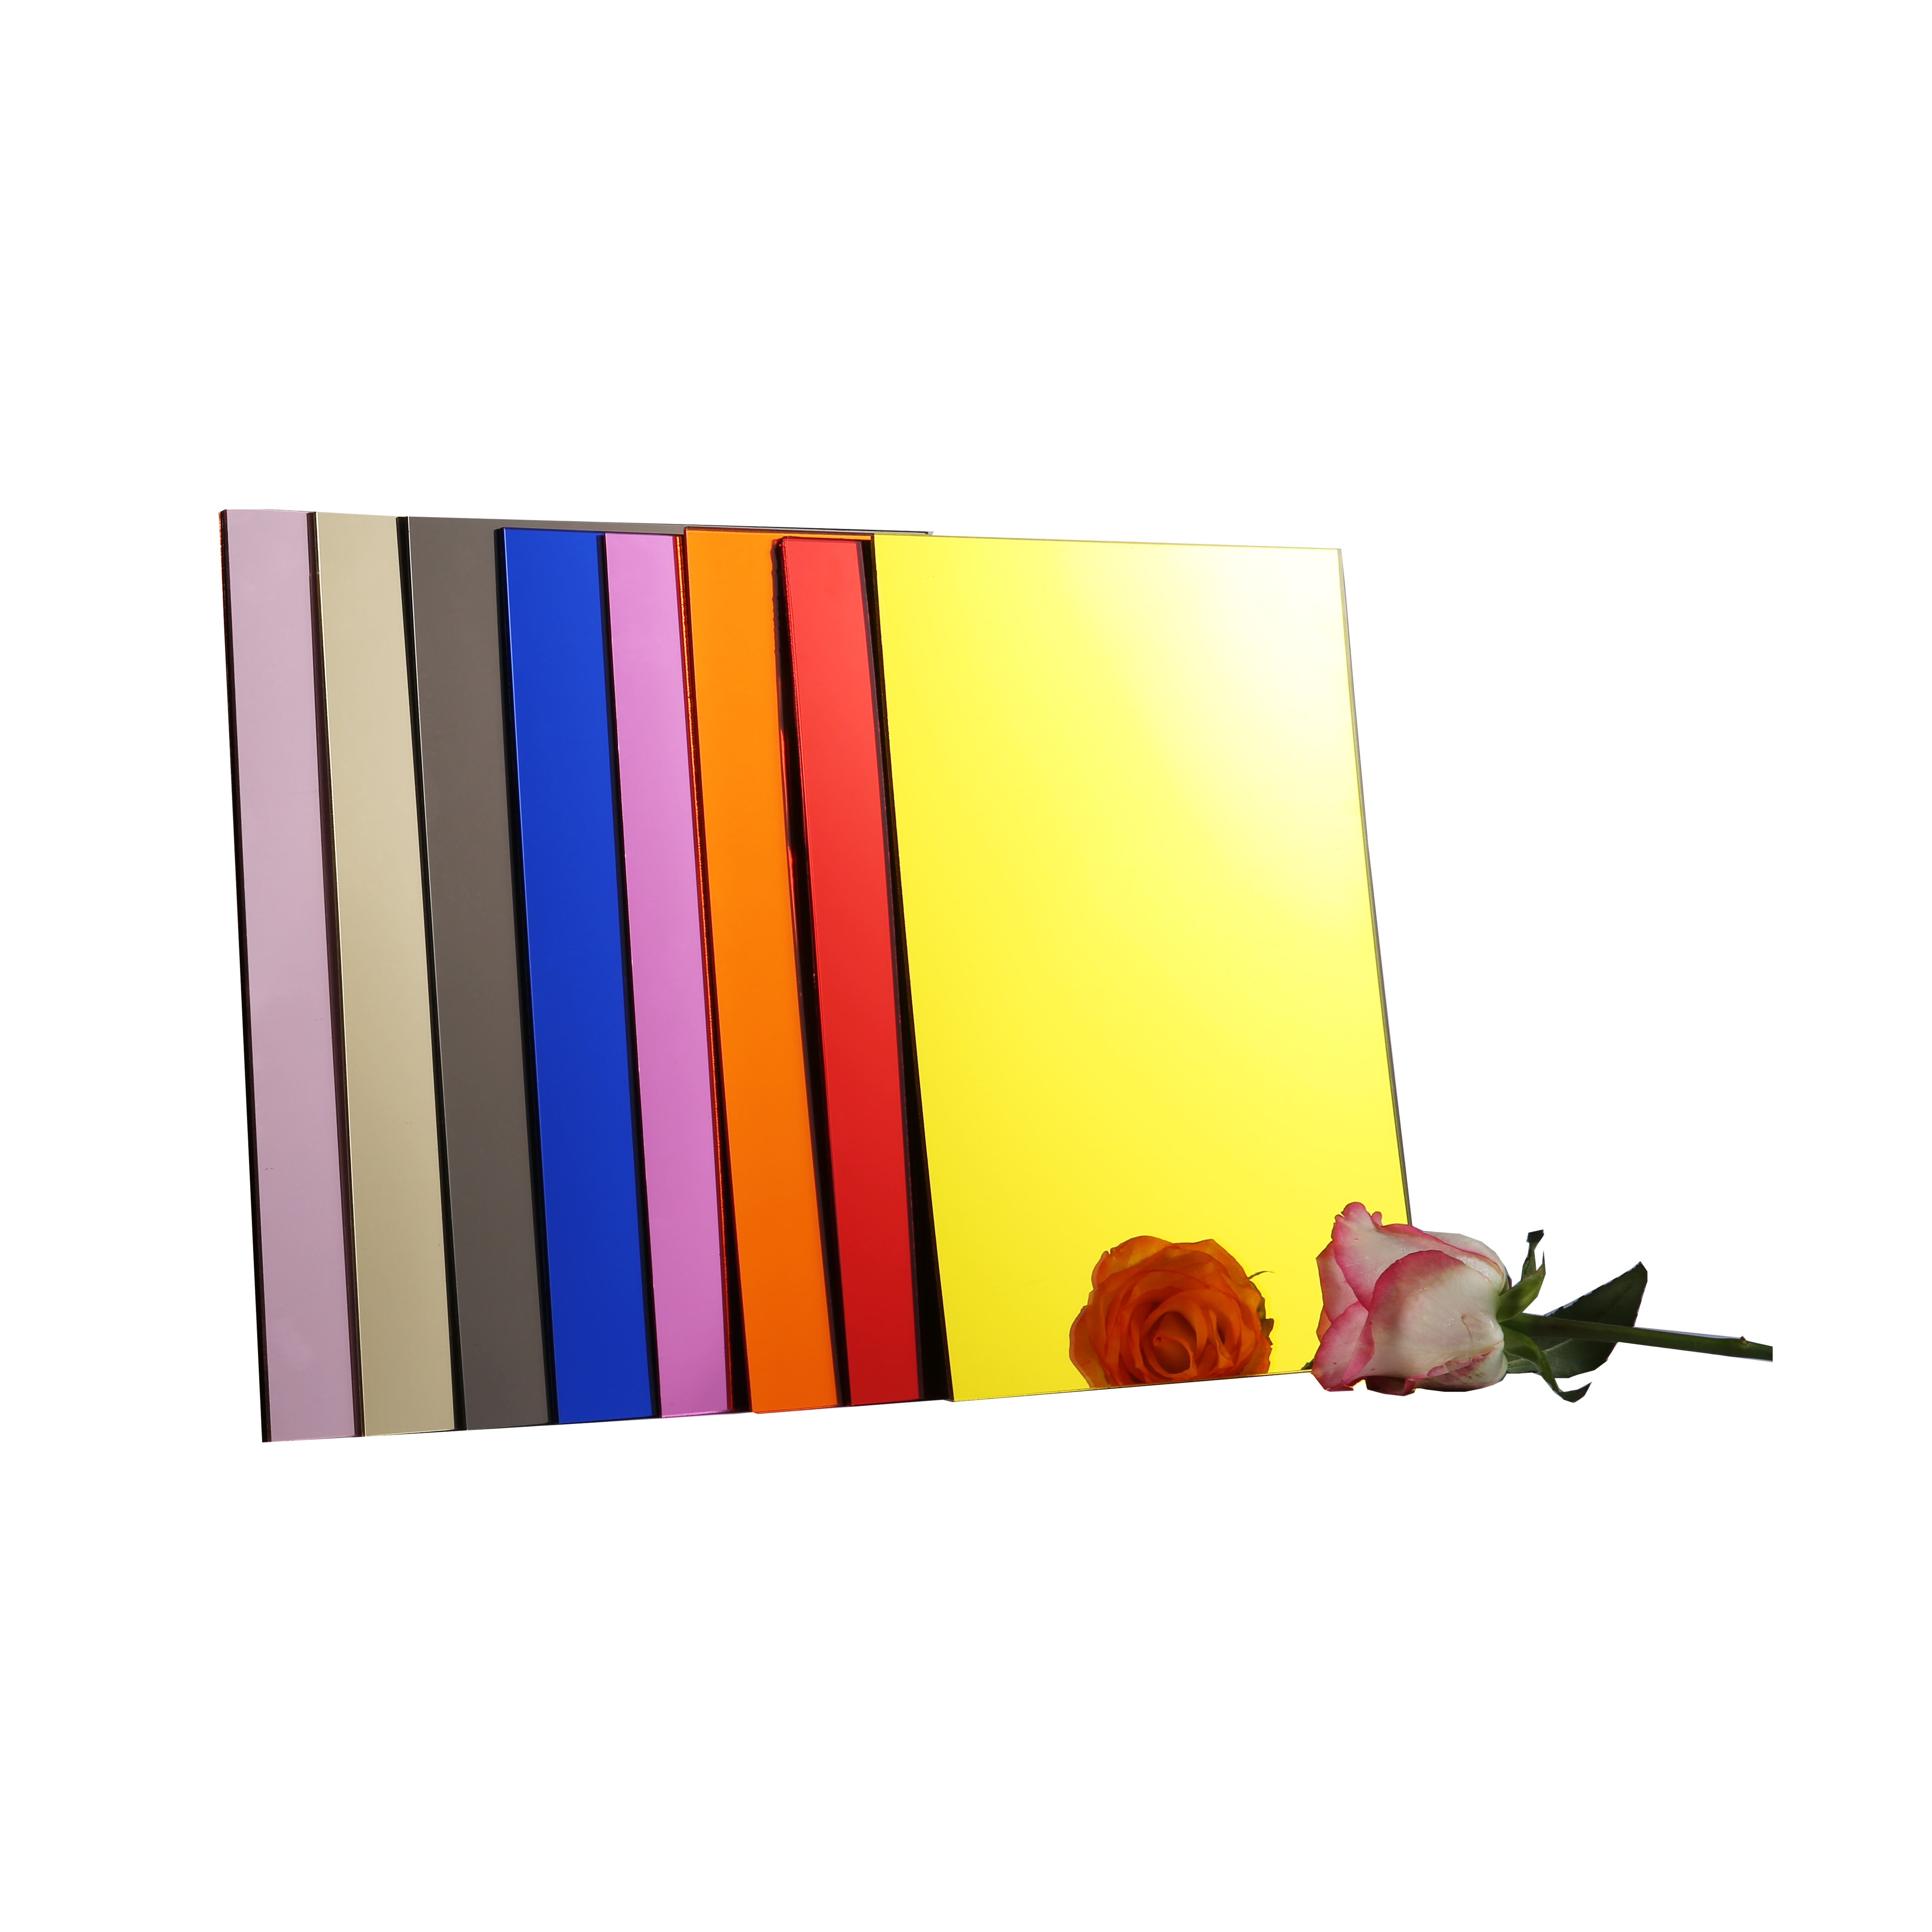 What are acrylic mirrors used for?